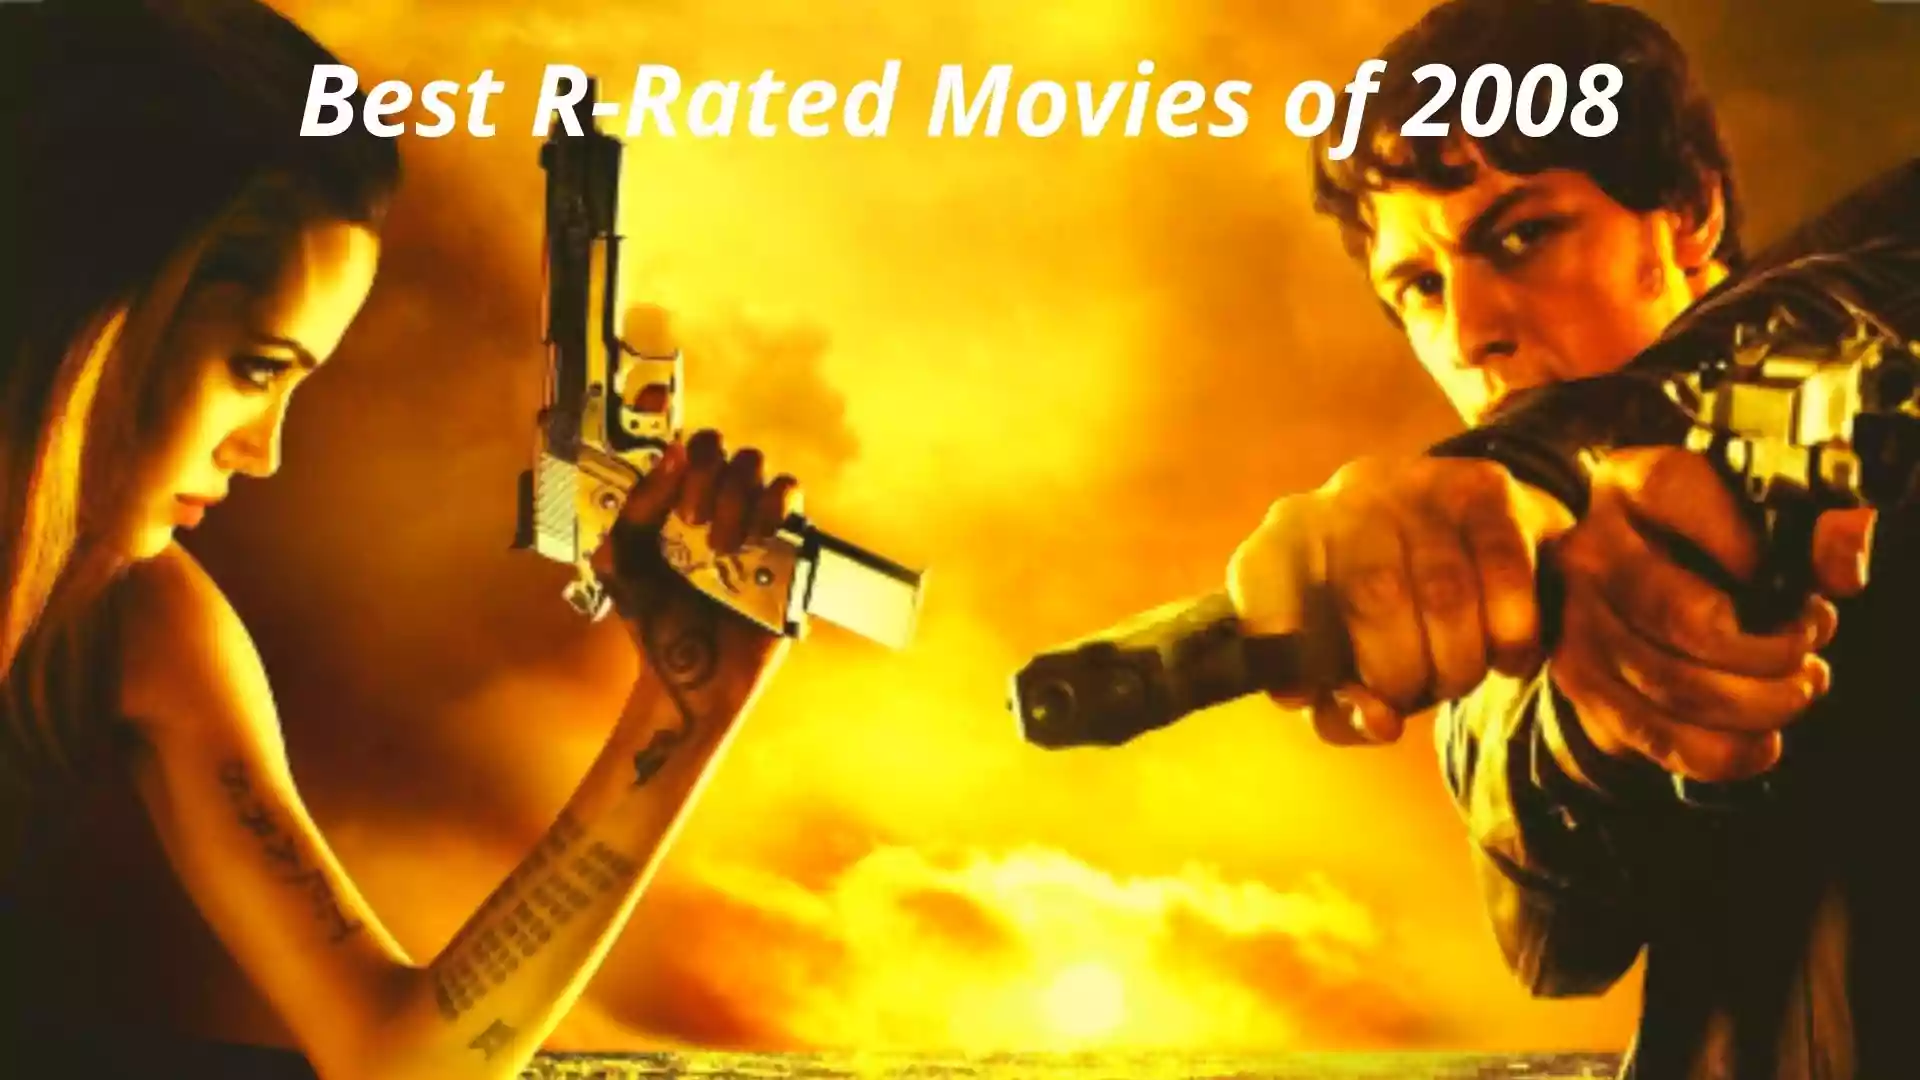 Best R-Rated Movies of 2008